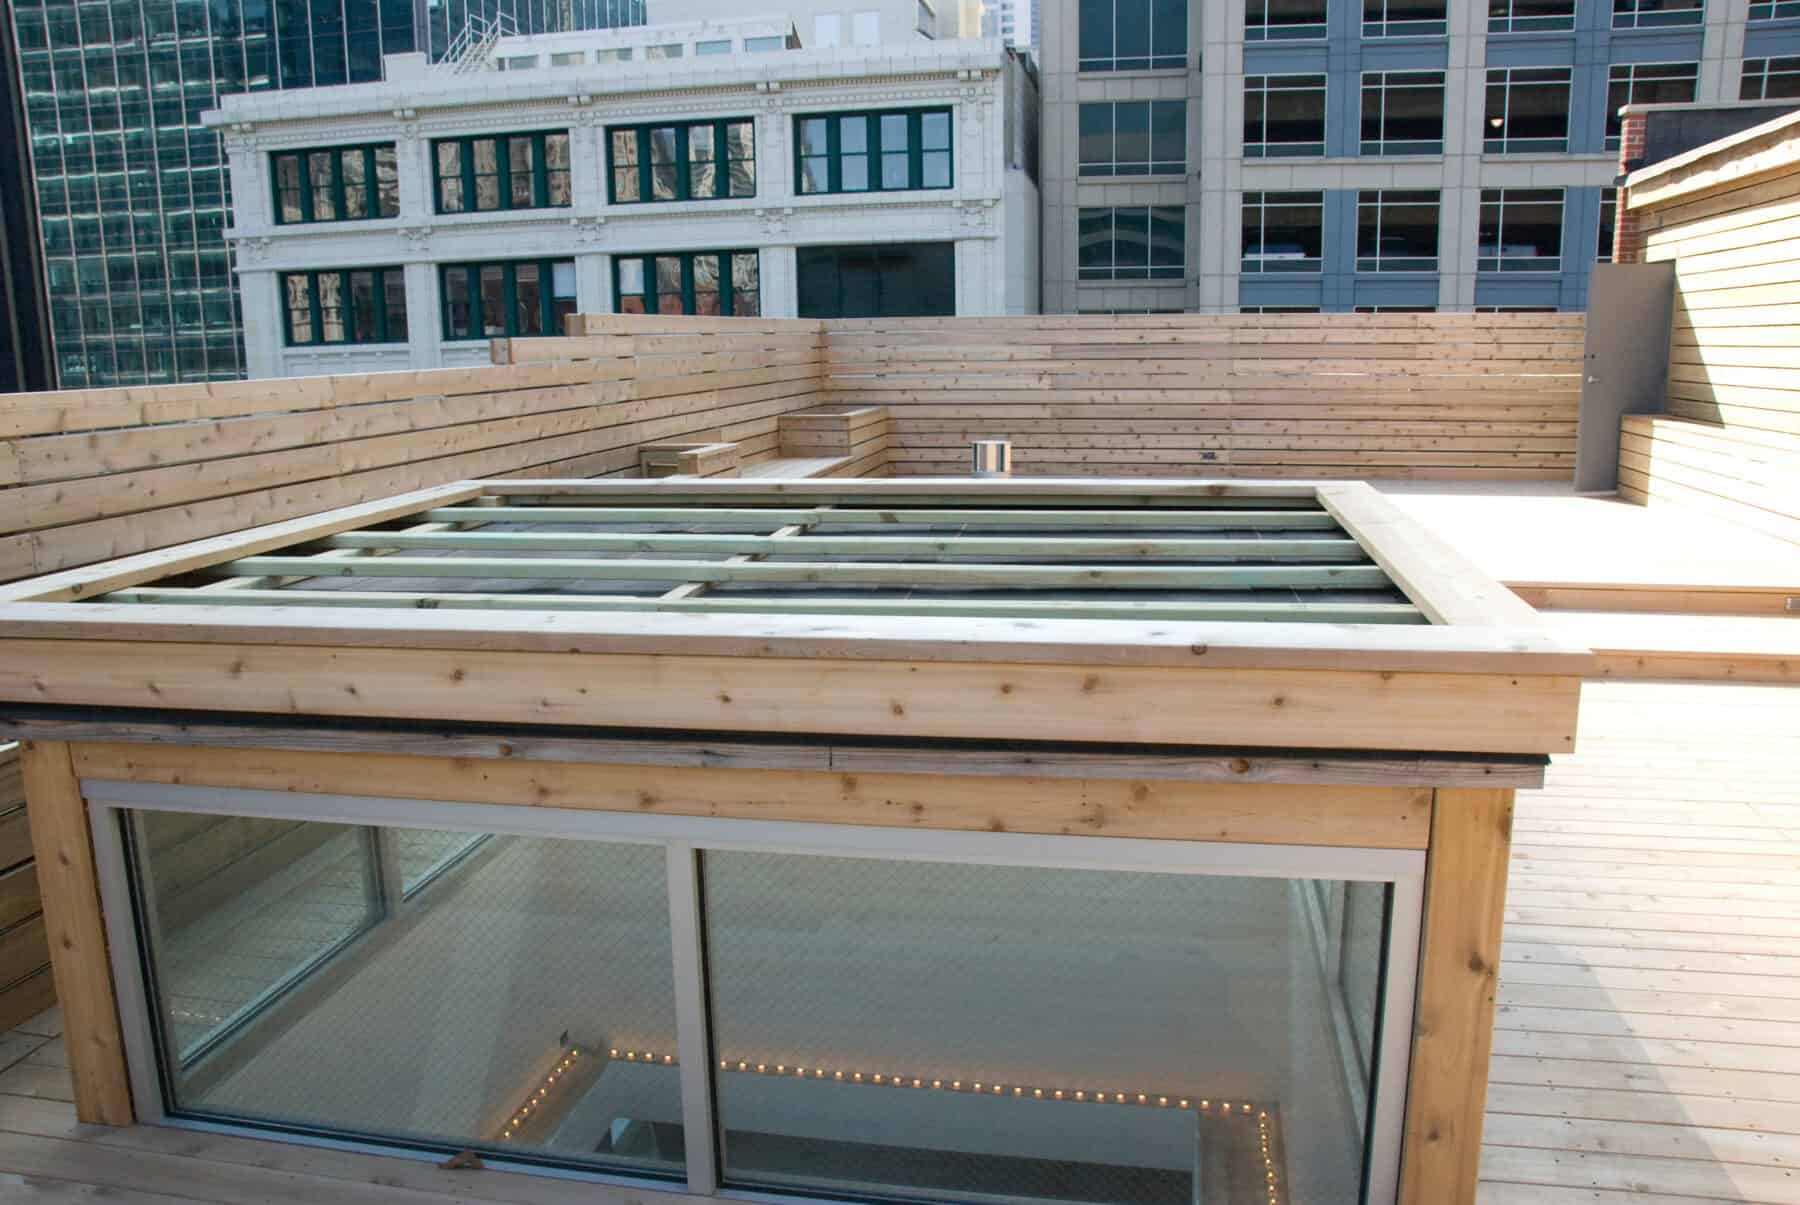 Custom Rooftop Deck with Wood Plant boxes, Skylight, Fence and Walkways from Construction Specialty Projects by Commercial Builder & General Contractor Structural Enterprises